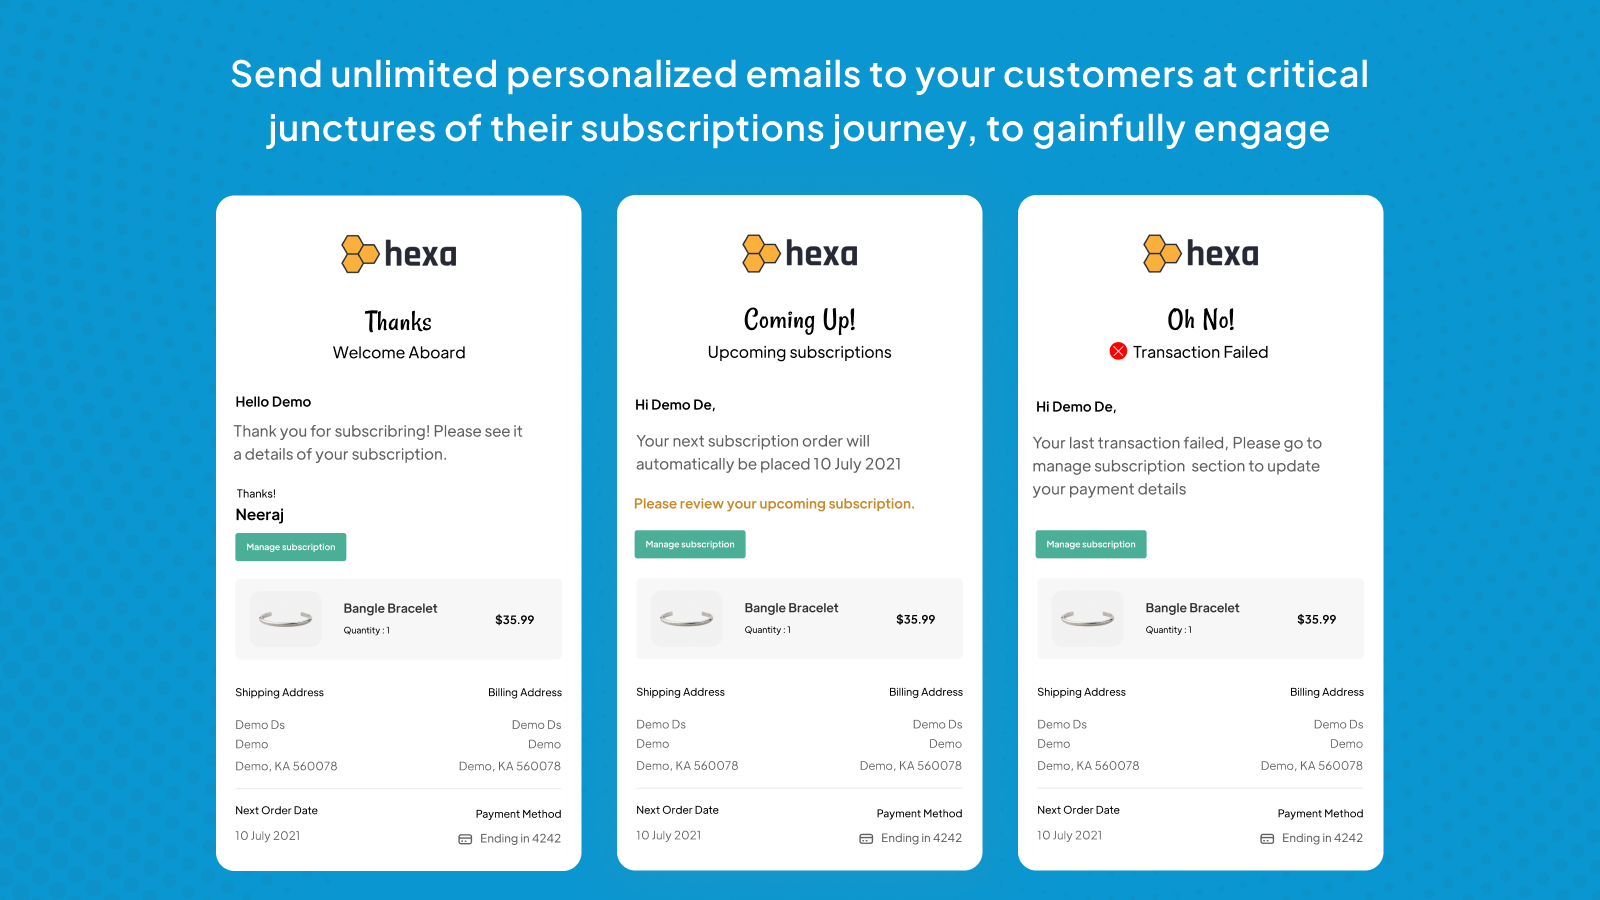 Personalized customer emails to smartly engage